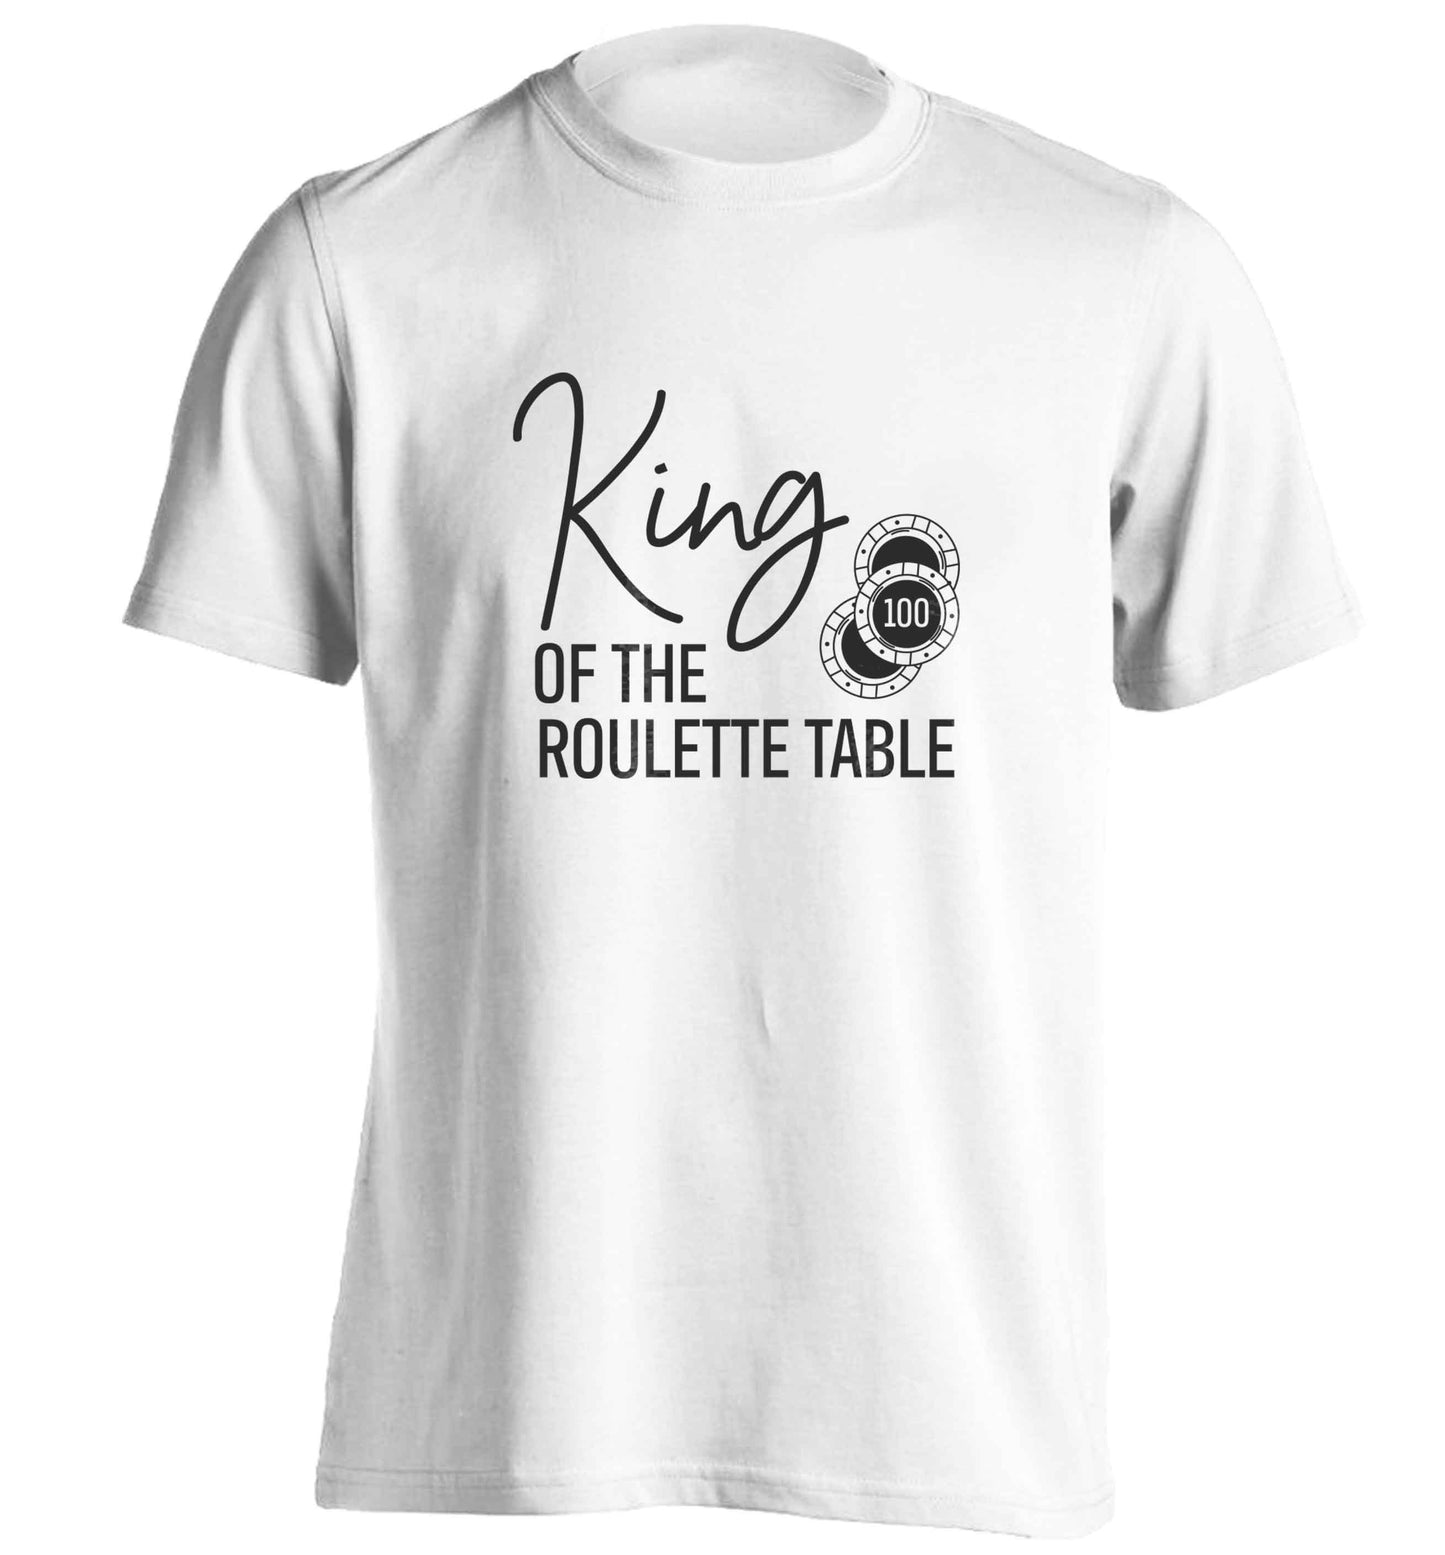 King of the roulette table adults unisex white Tshirt 2XL